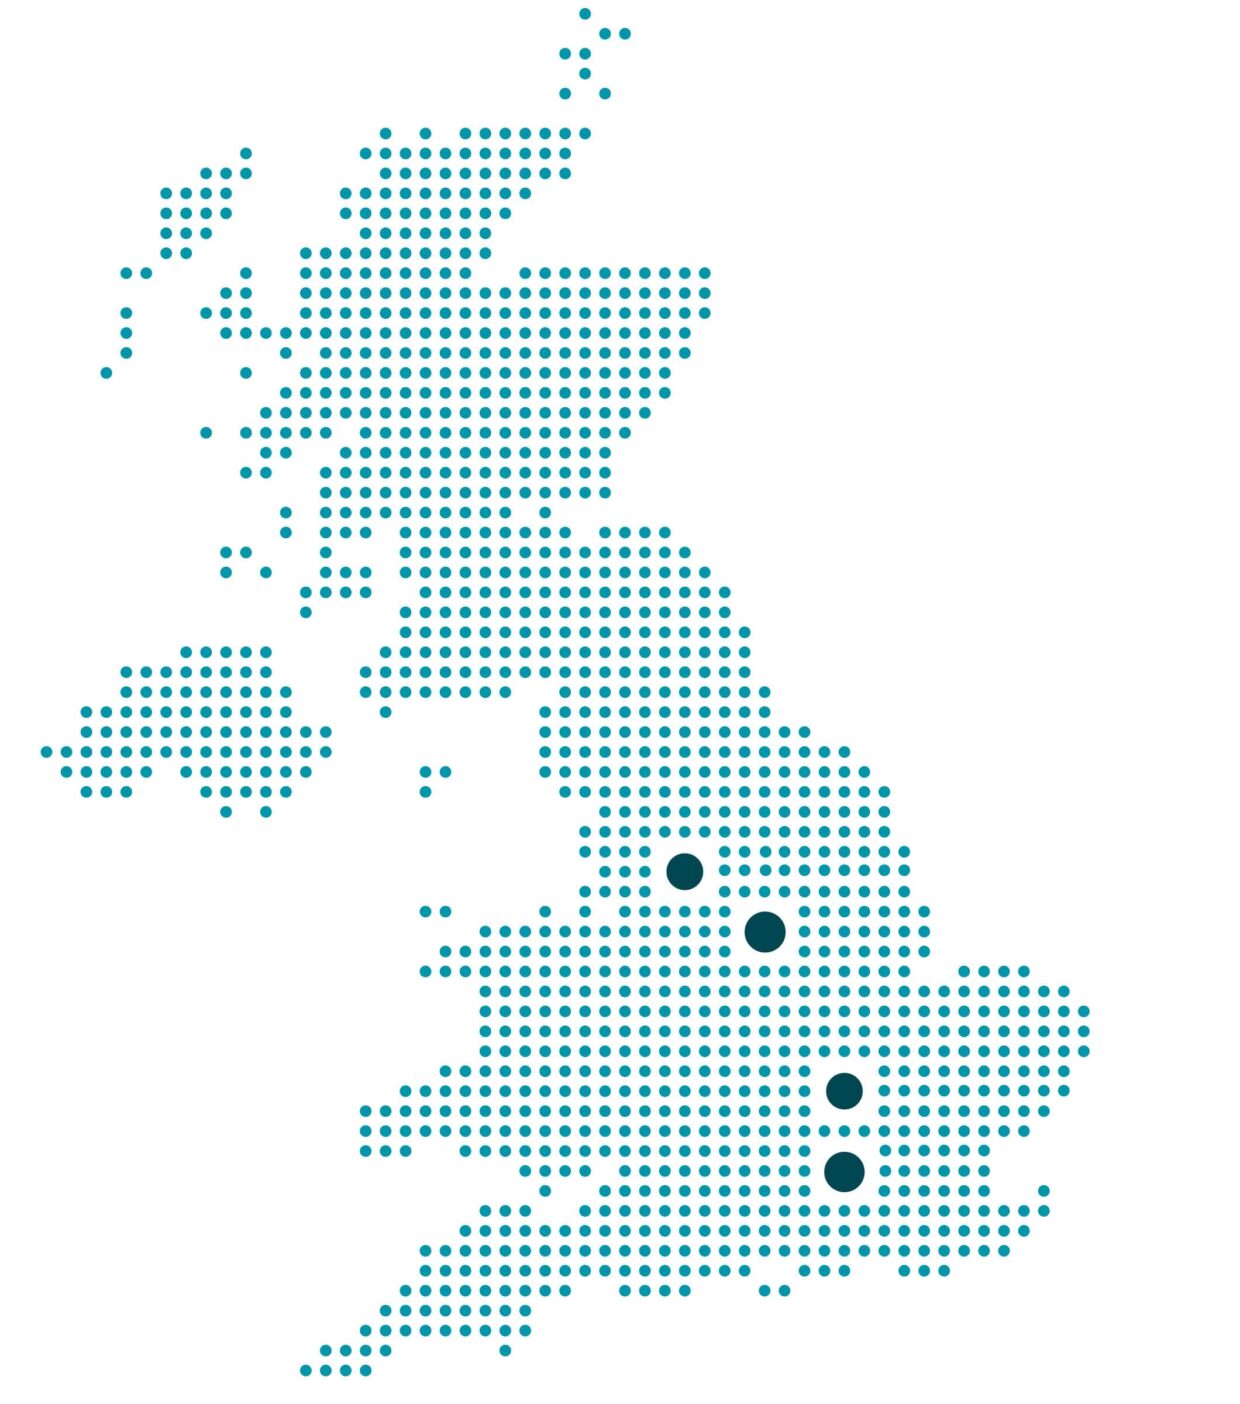 Our current retrofit projects shown on a UK map